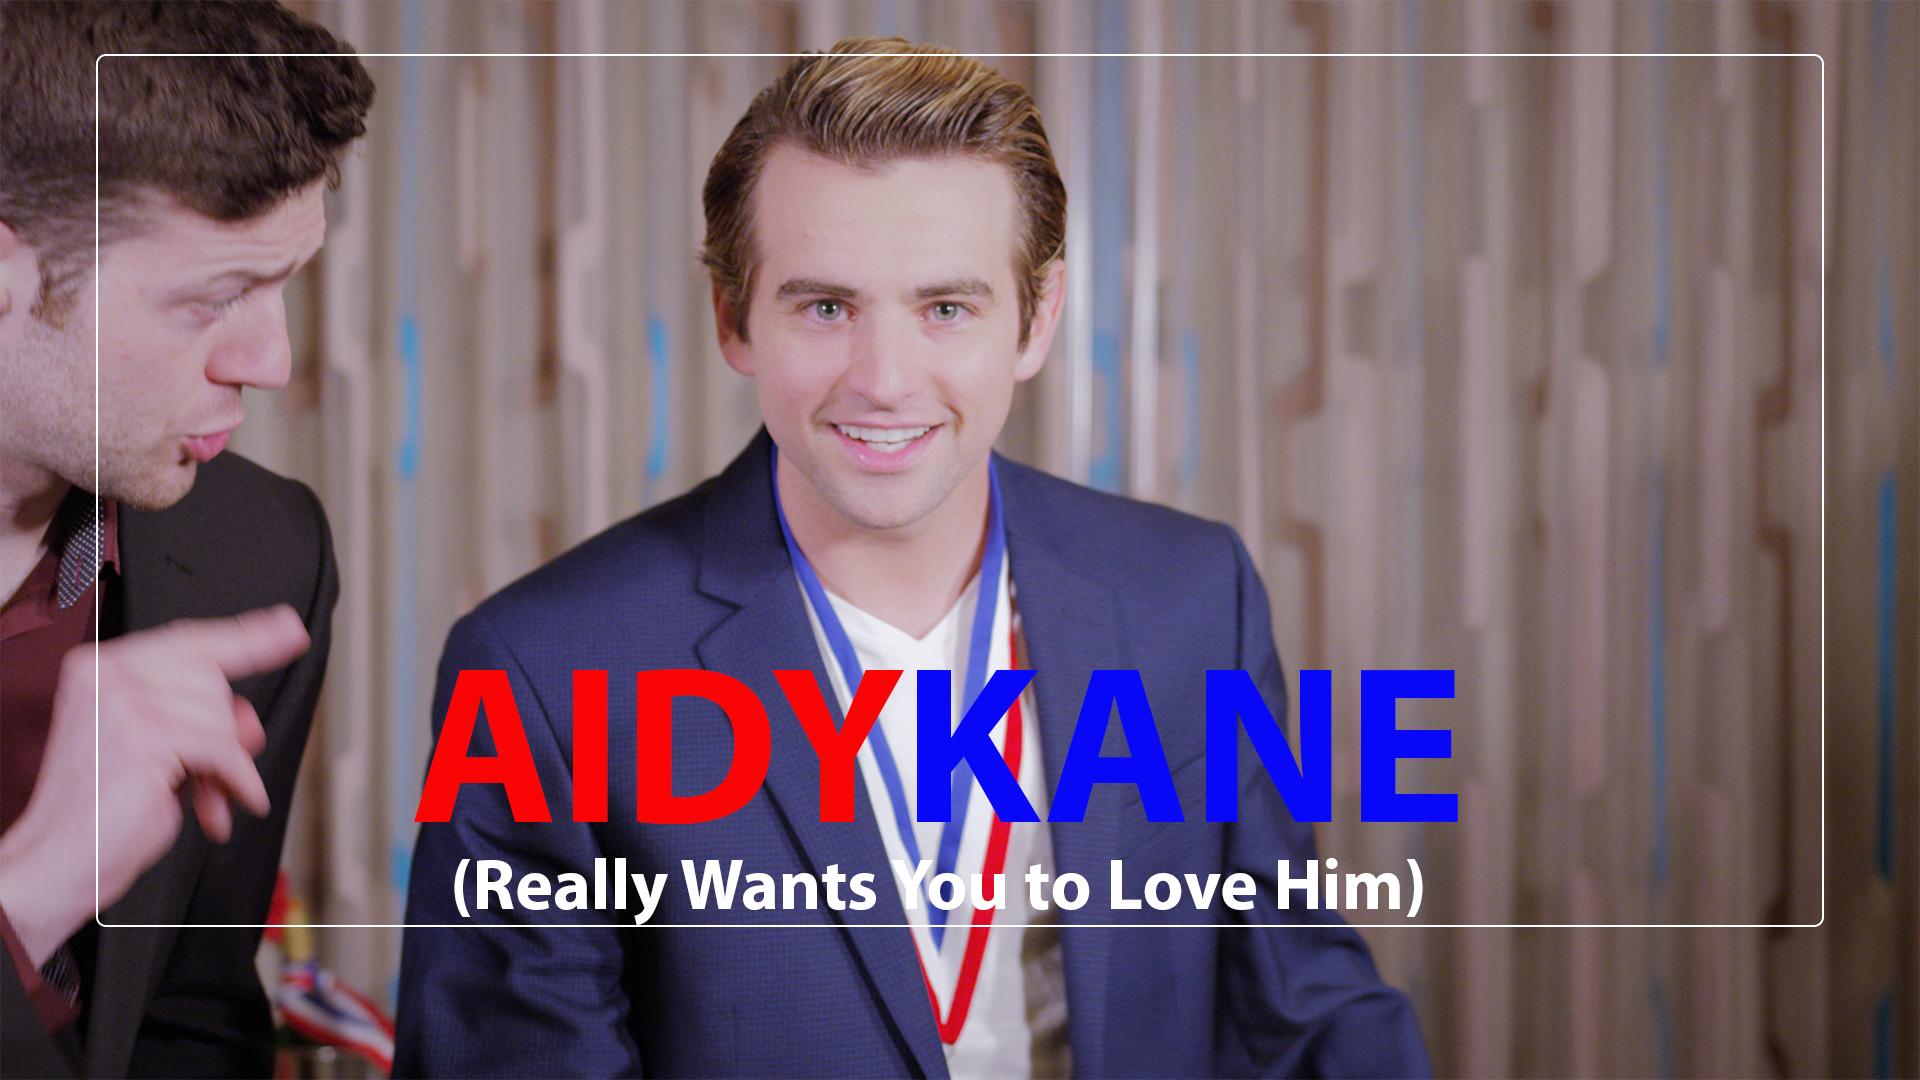 Benjamin Bryant in "Aidy Kane (Really Wants You to Love Him)"